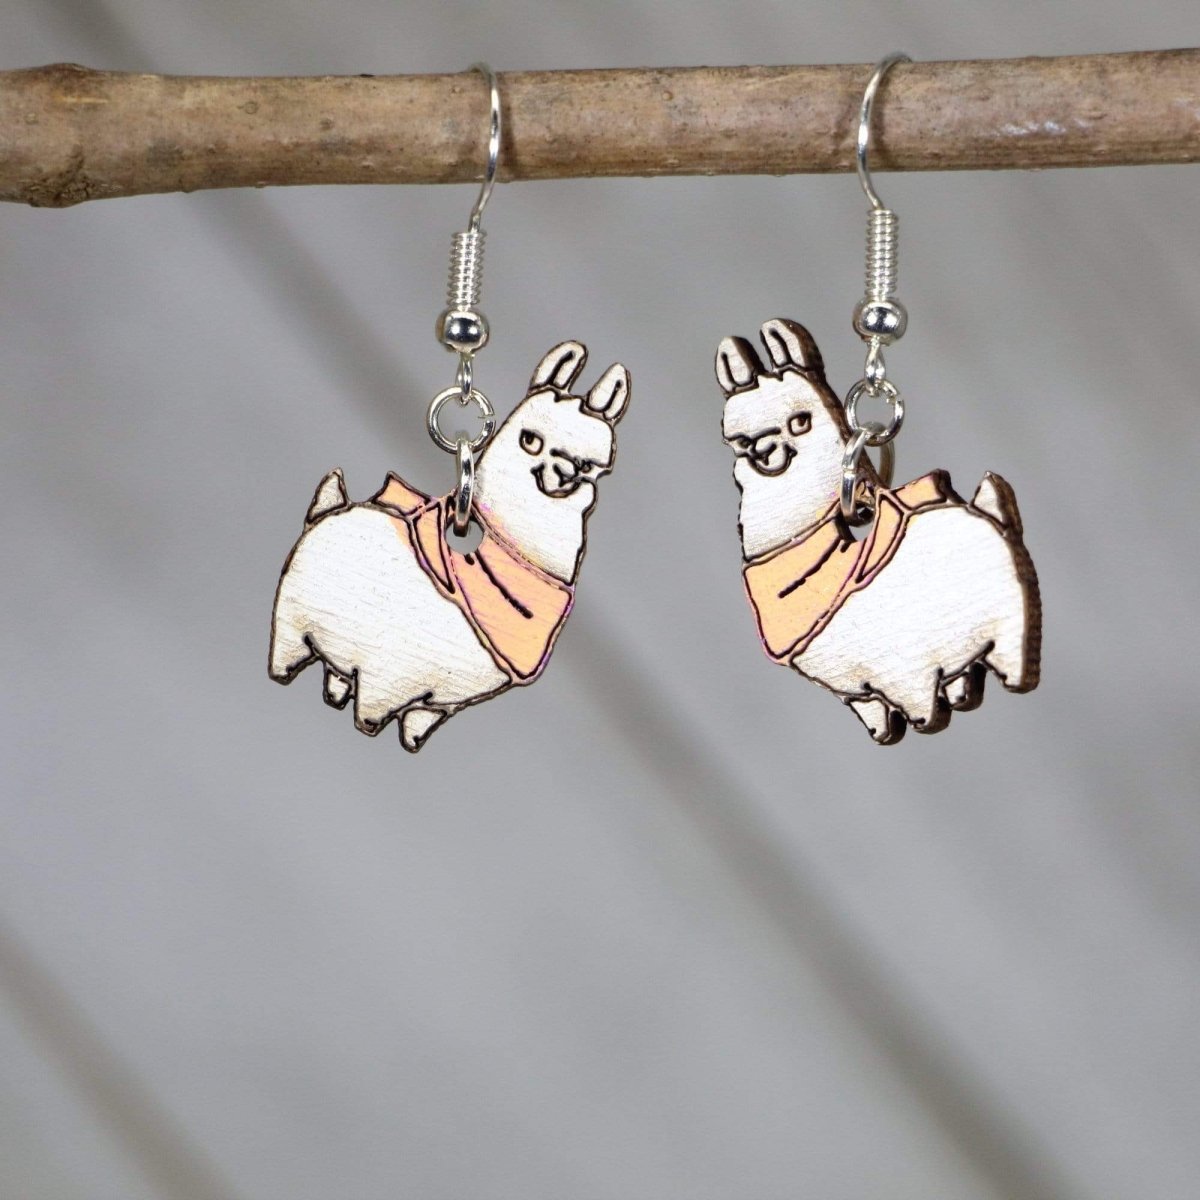 Llama with Scarf Wooden Dangle Earrings - Peach - Cate's Concepts, LLC